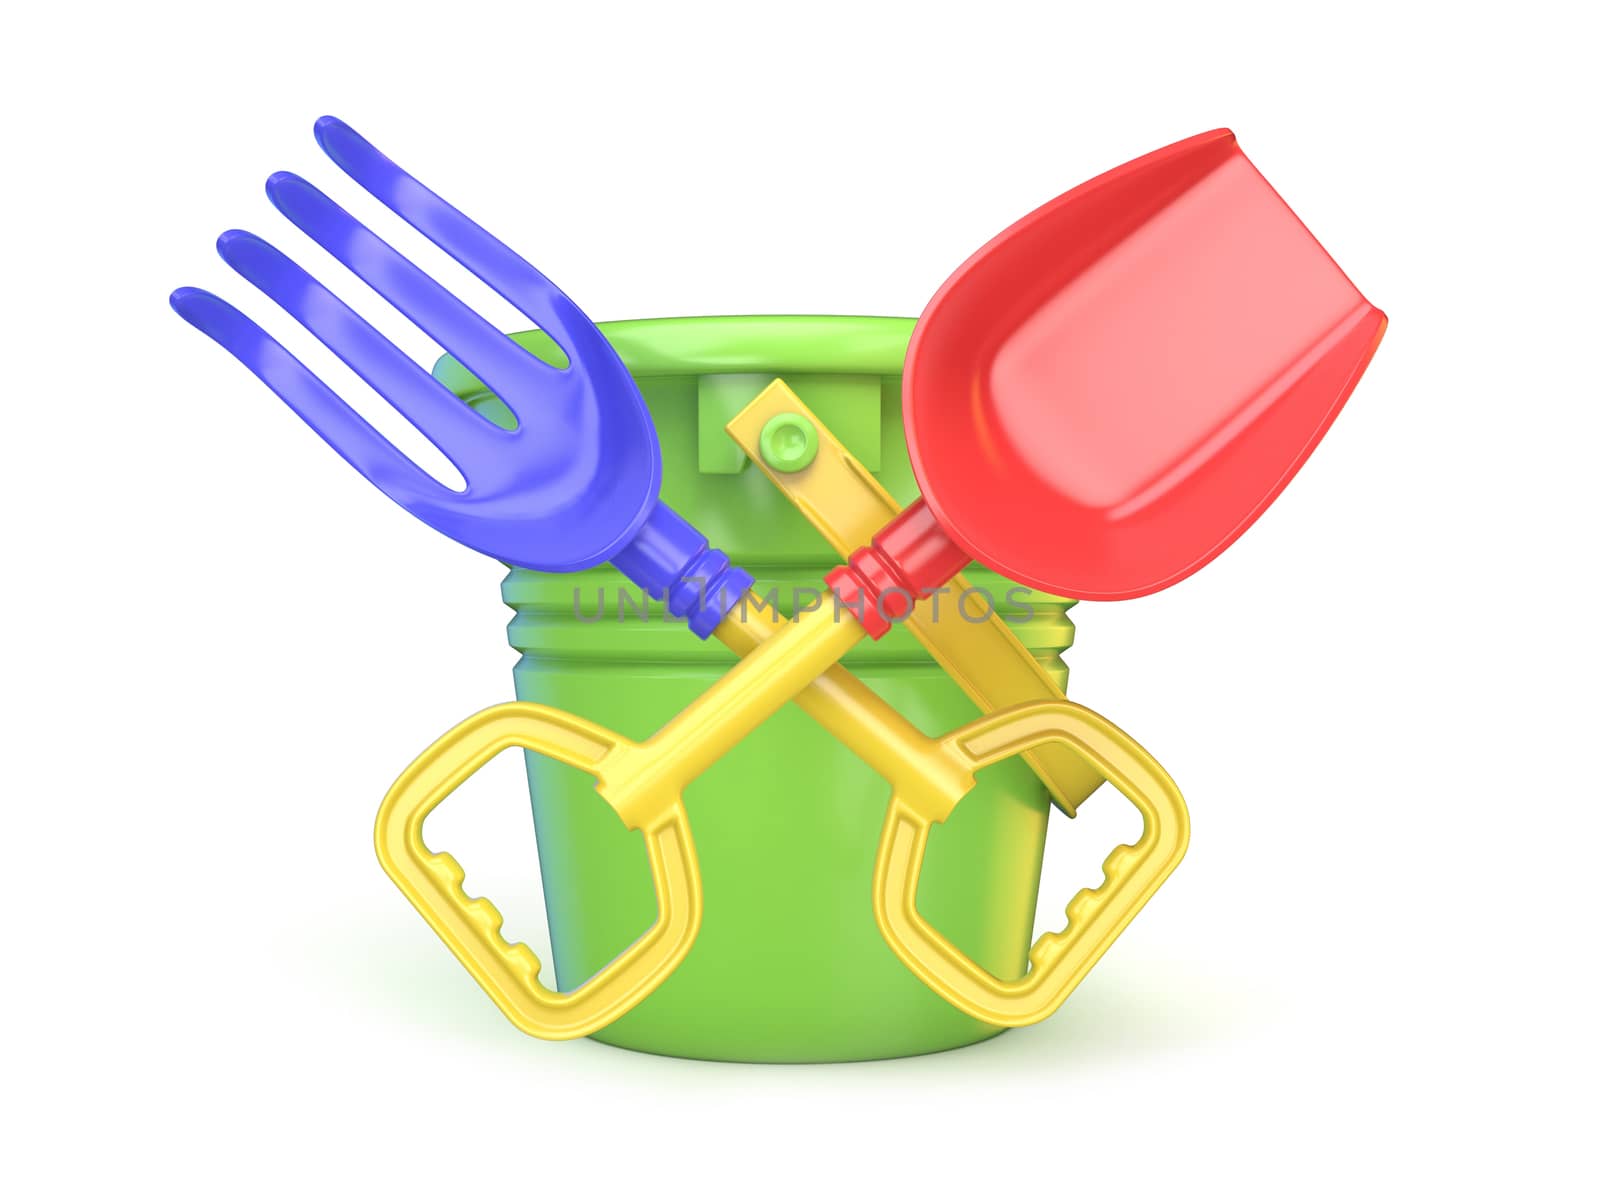 Toy bucket, rake and spade. 3D render illustration isolated on white background